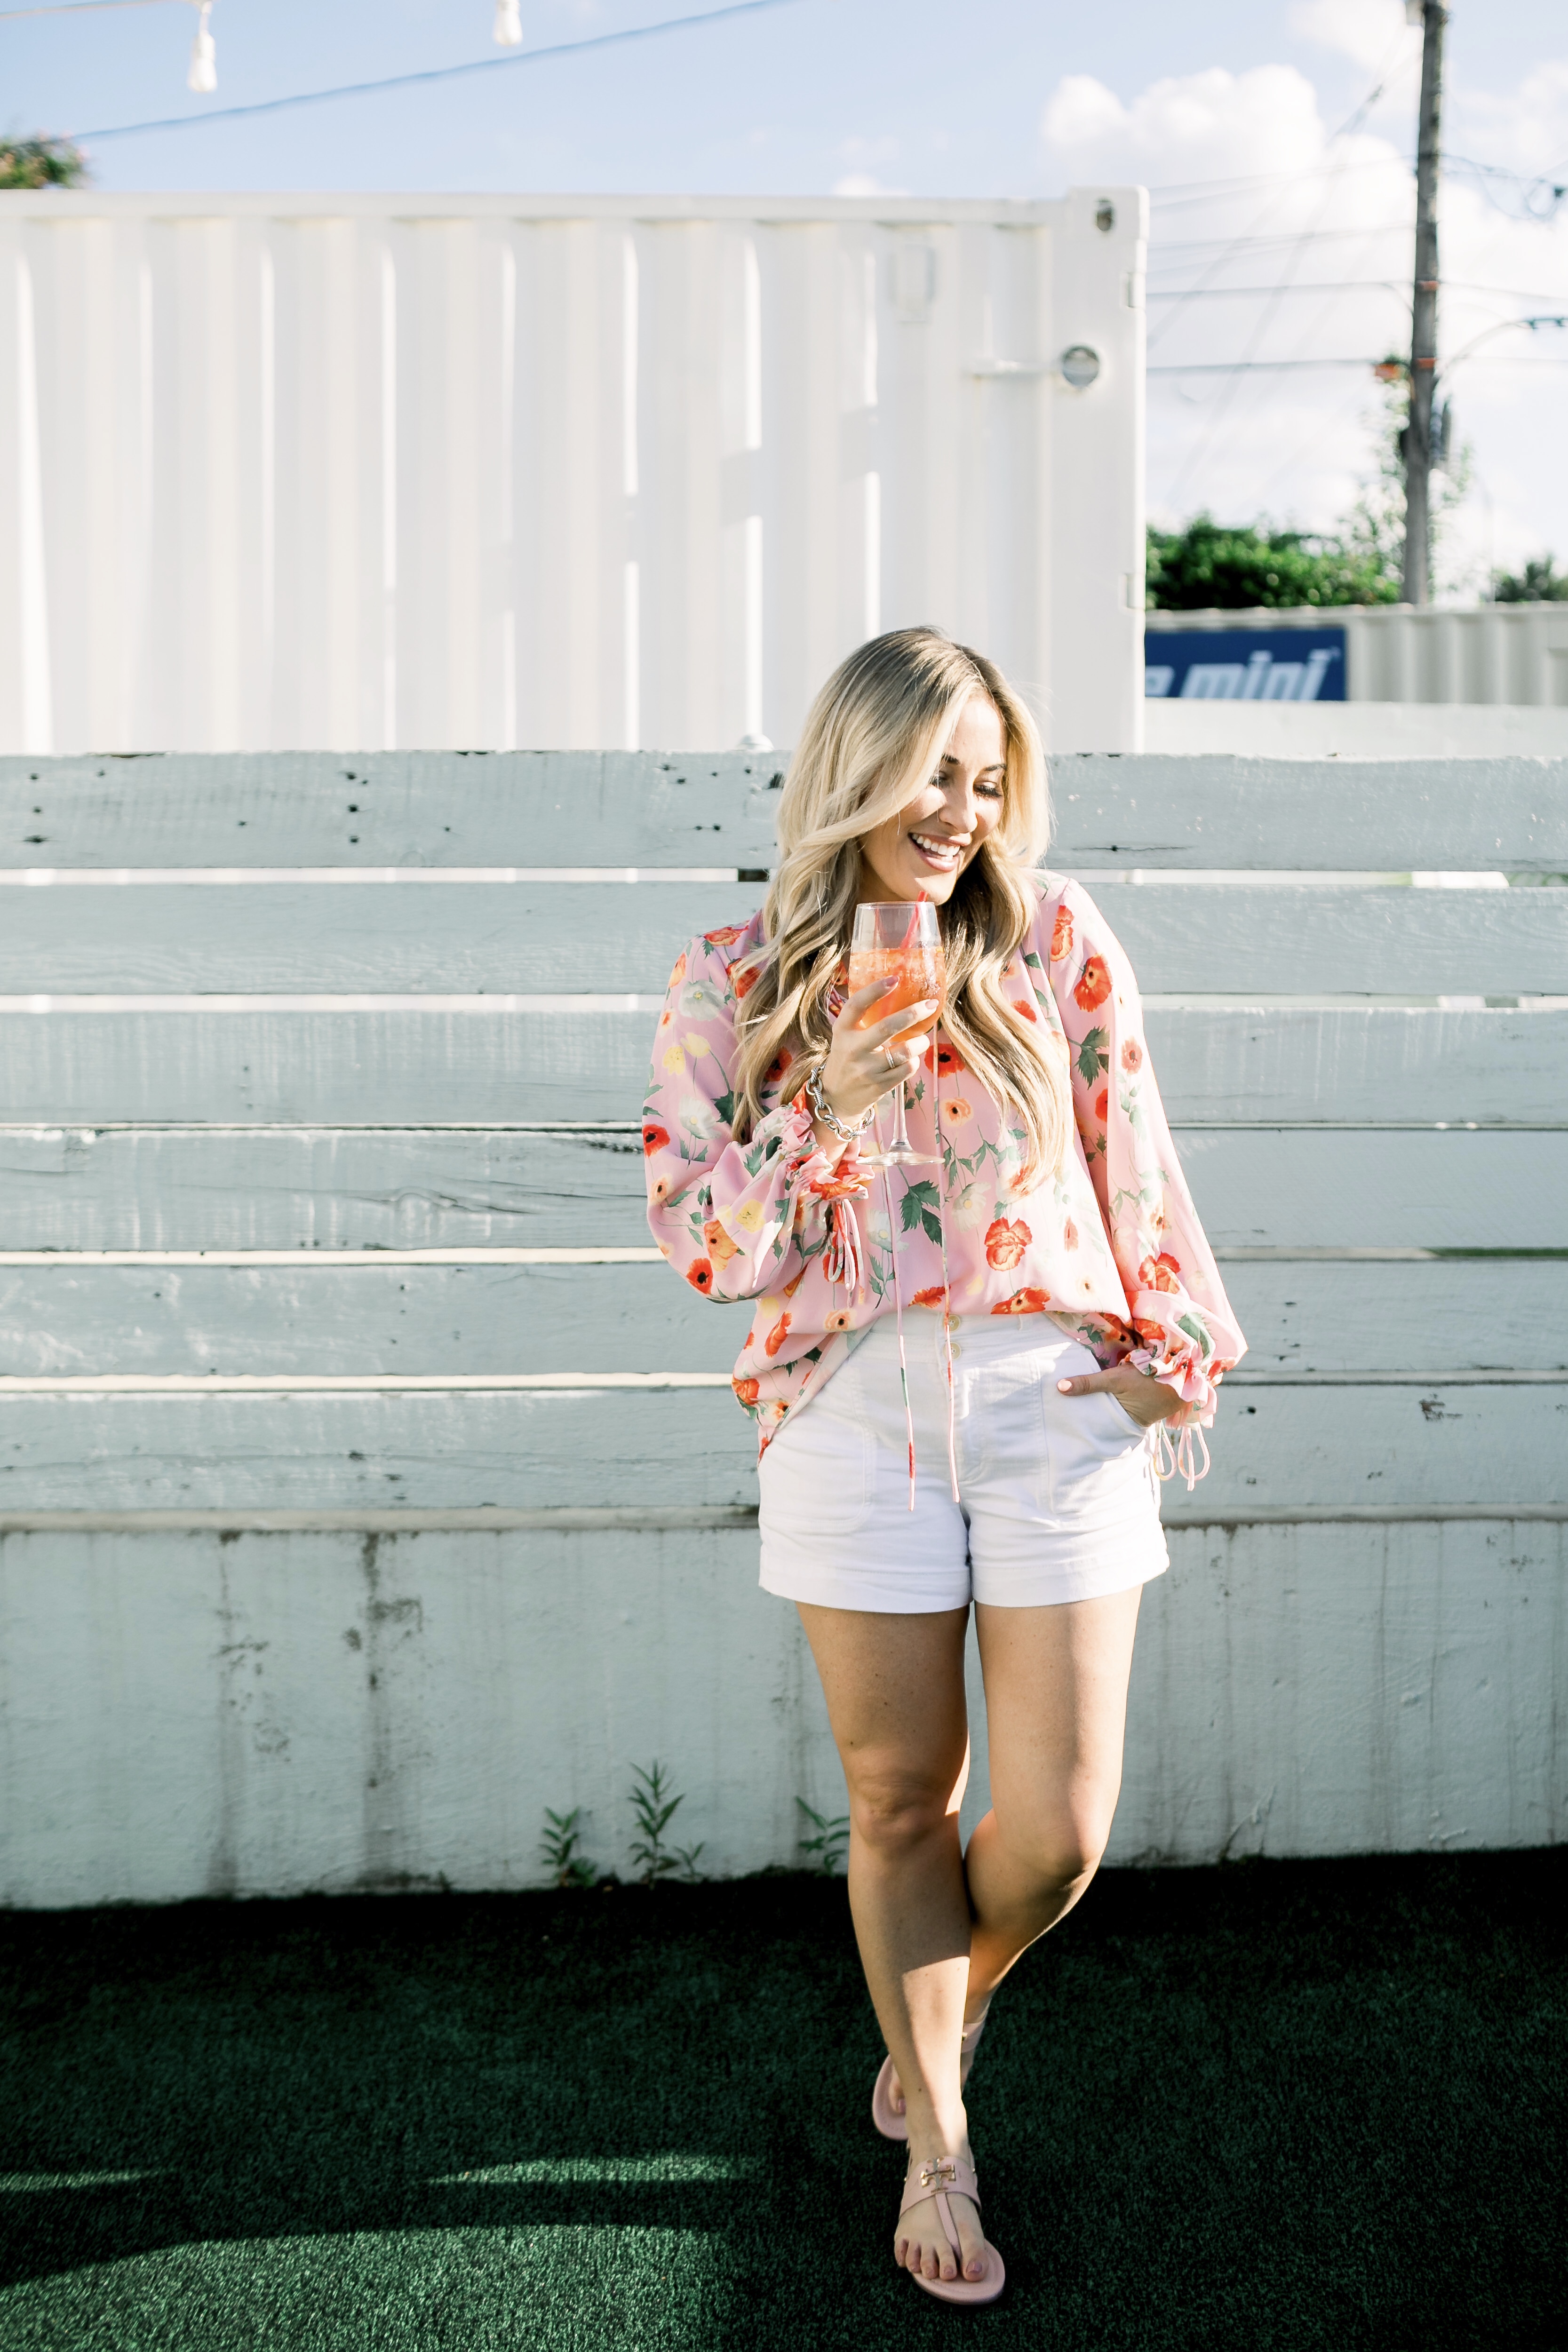 Bright summer colors fashion featured by top US fashion blog, Walking in Memphis in High Heels: image of a woman wearing a Gibson & Latimer floral shirt, Anthropologie high waisted white denim shorts, Tory Burch Miller flip flops and a David Yurman bracelet